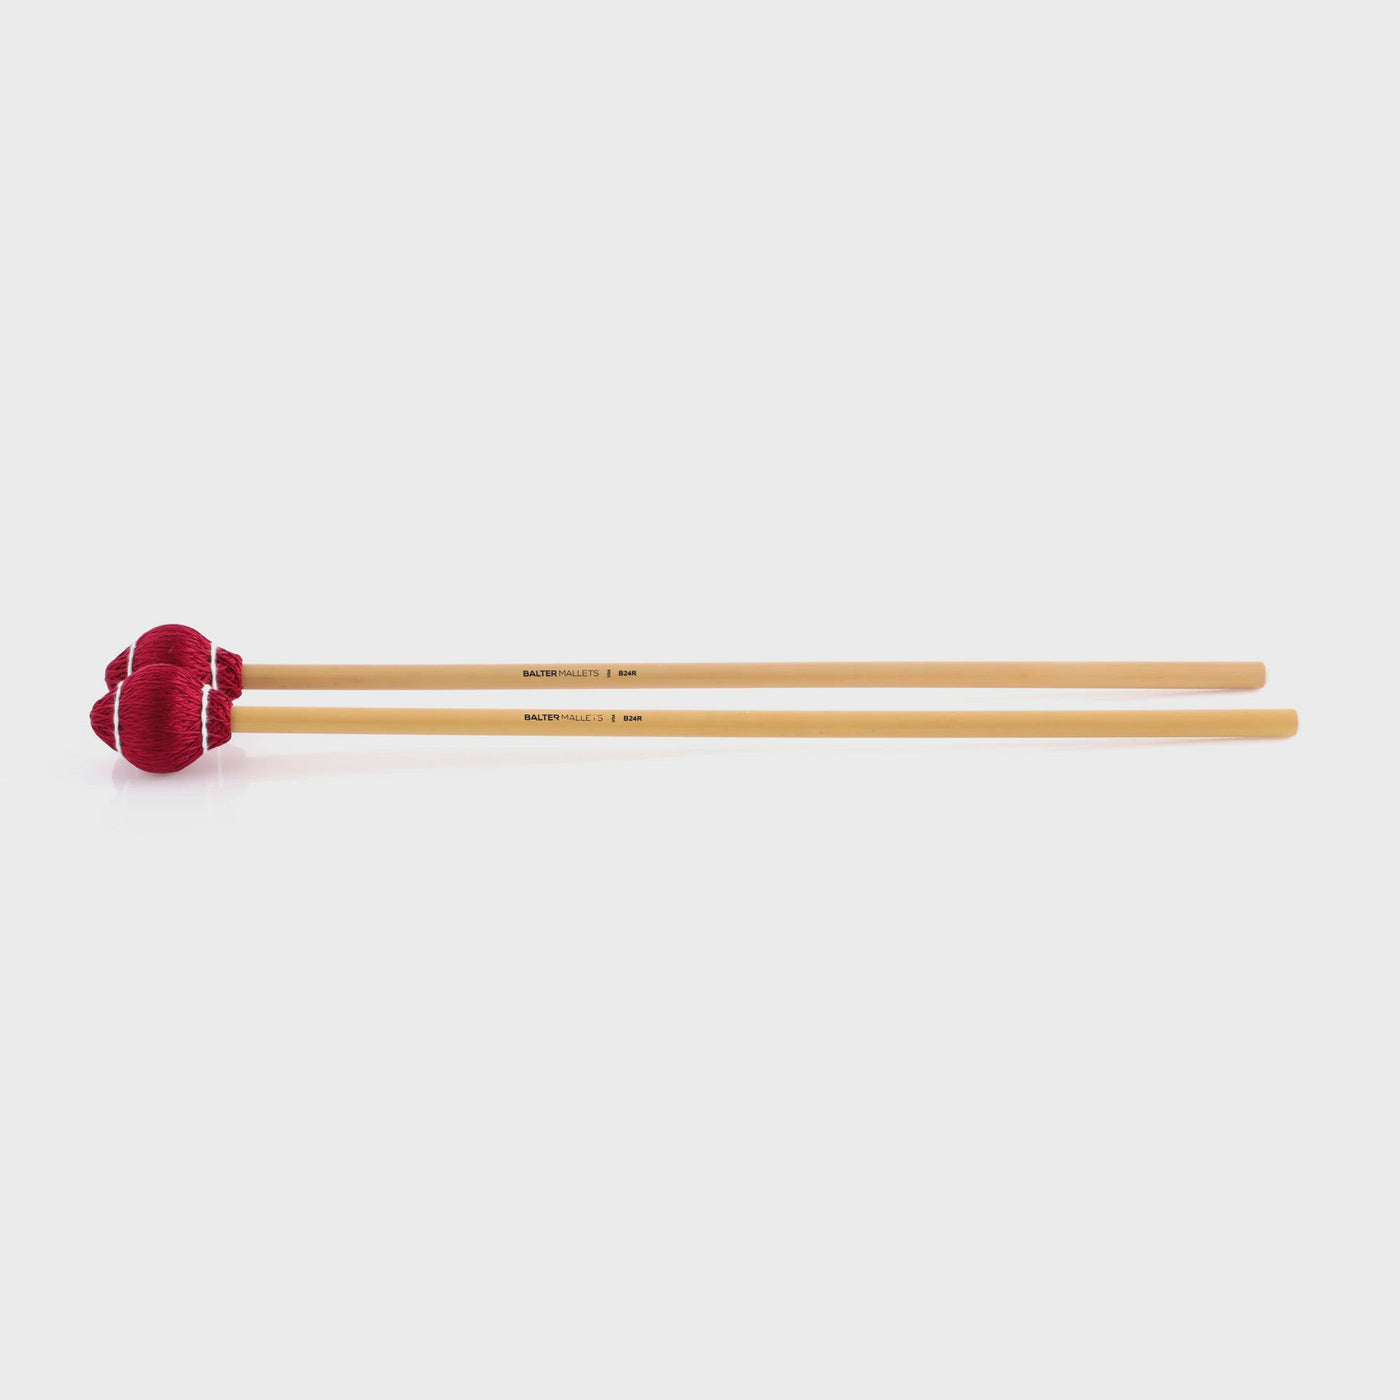 Balter Mallets B24R Pro Vibe Mallets - Soft, Red Cord